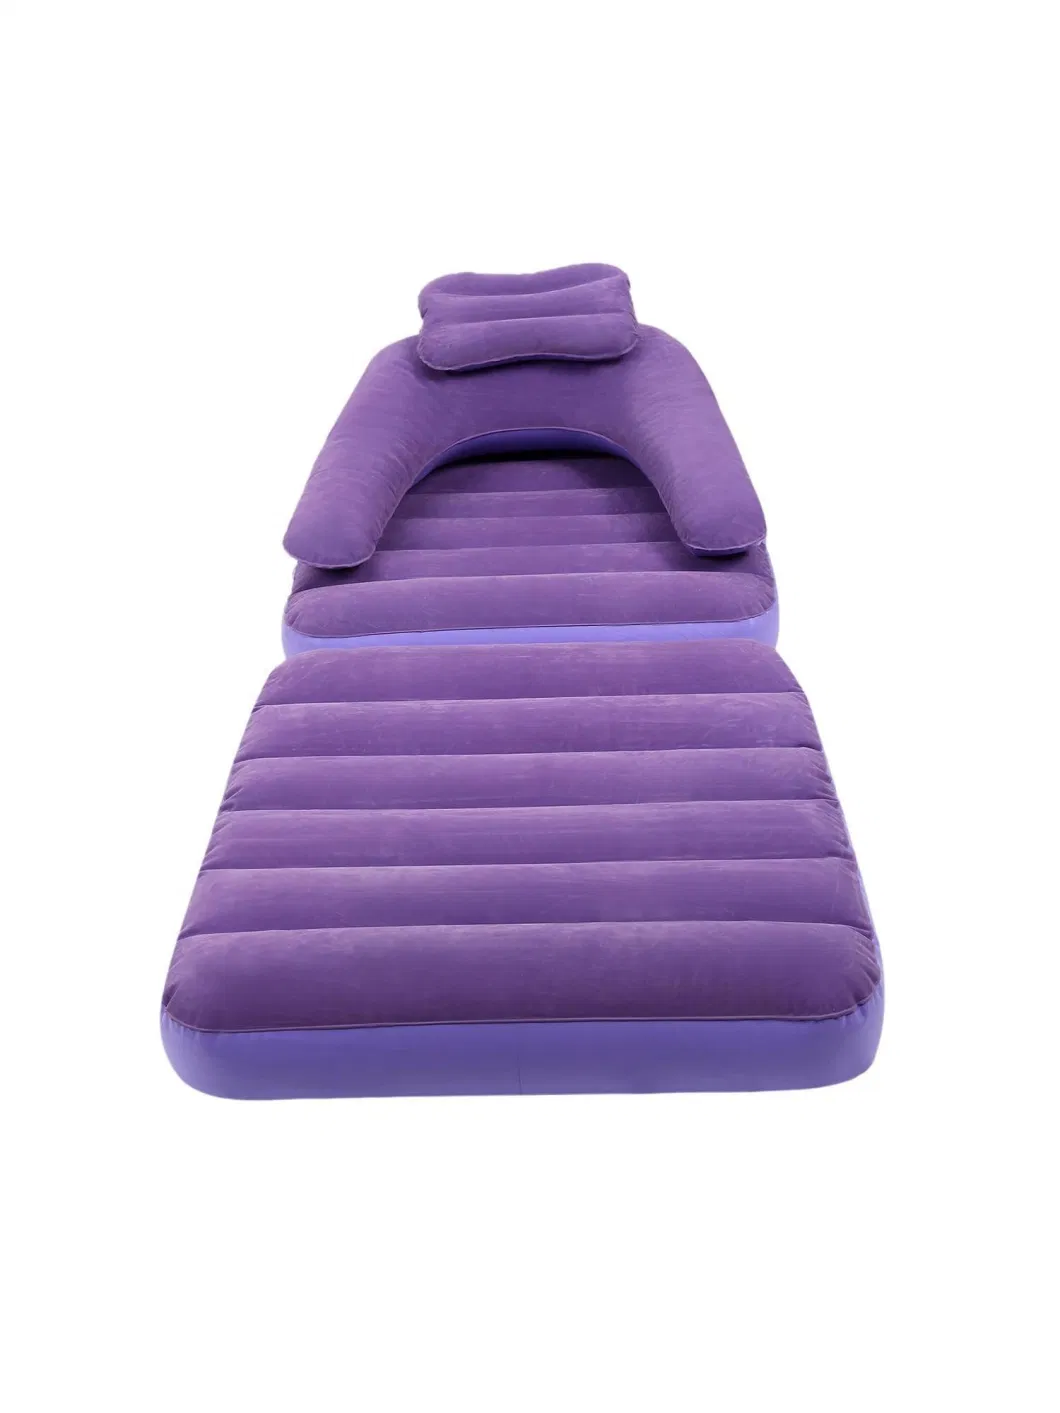 Portable Foldable Single Flocked Inflatable Air Bed Mattress Outdoor Camping Bed